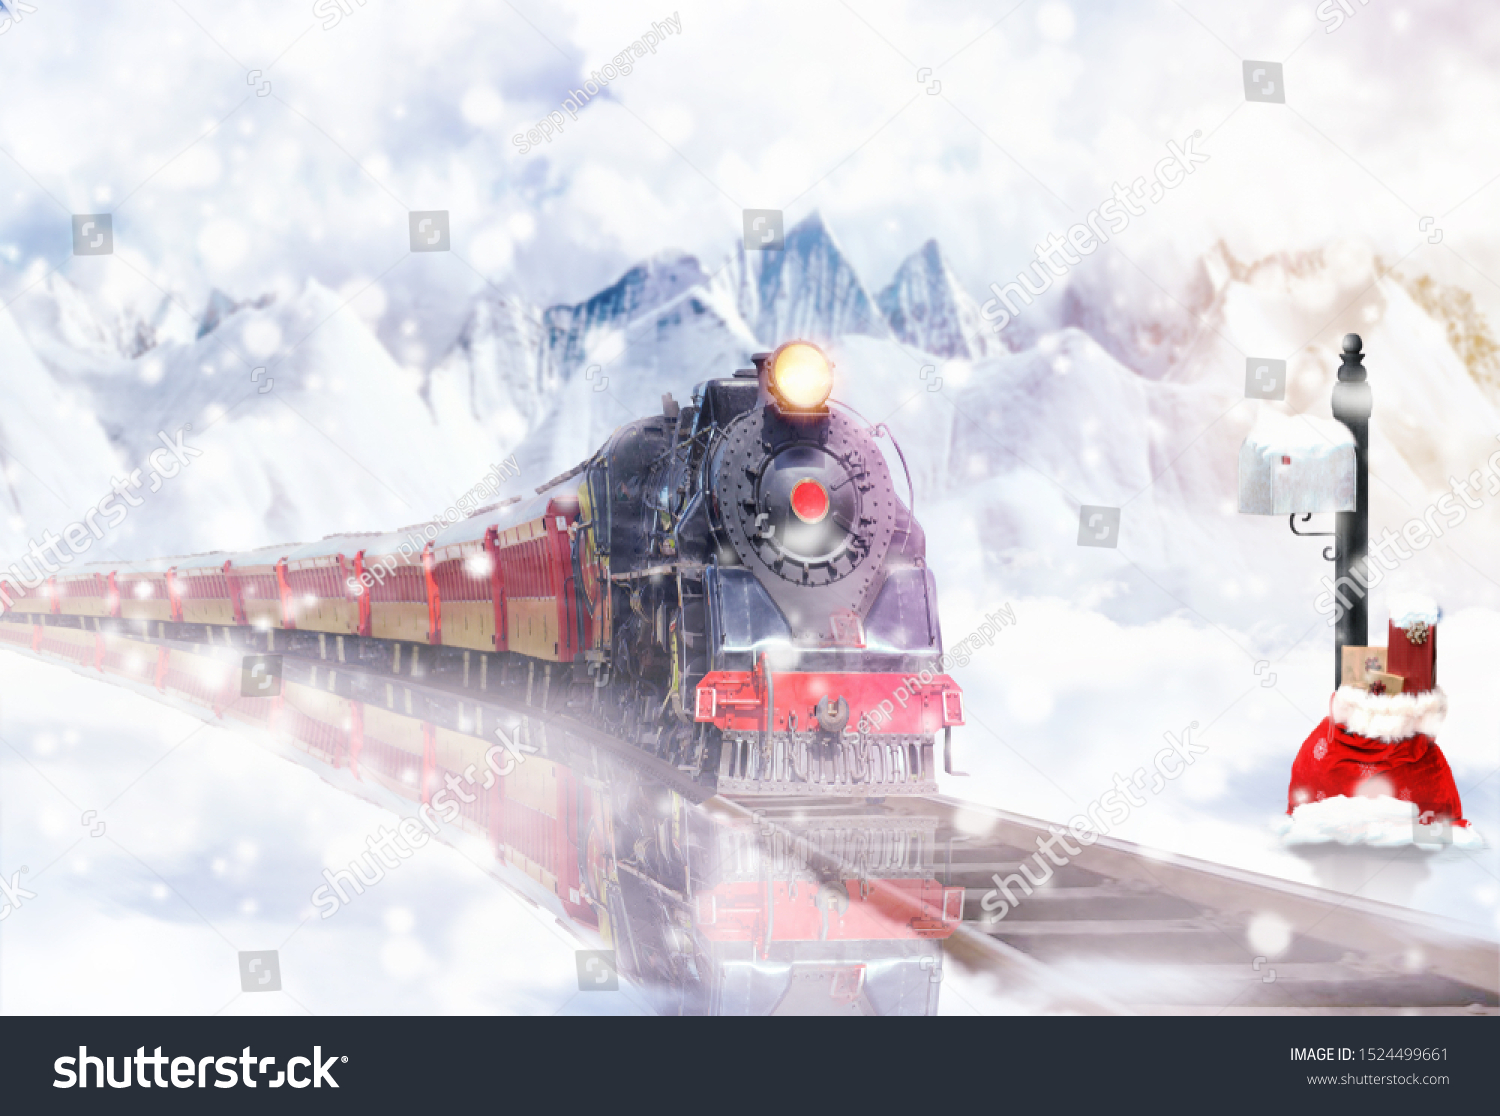 Christmas Express in the snowy landscape brings gifts #1524499661